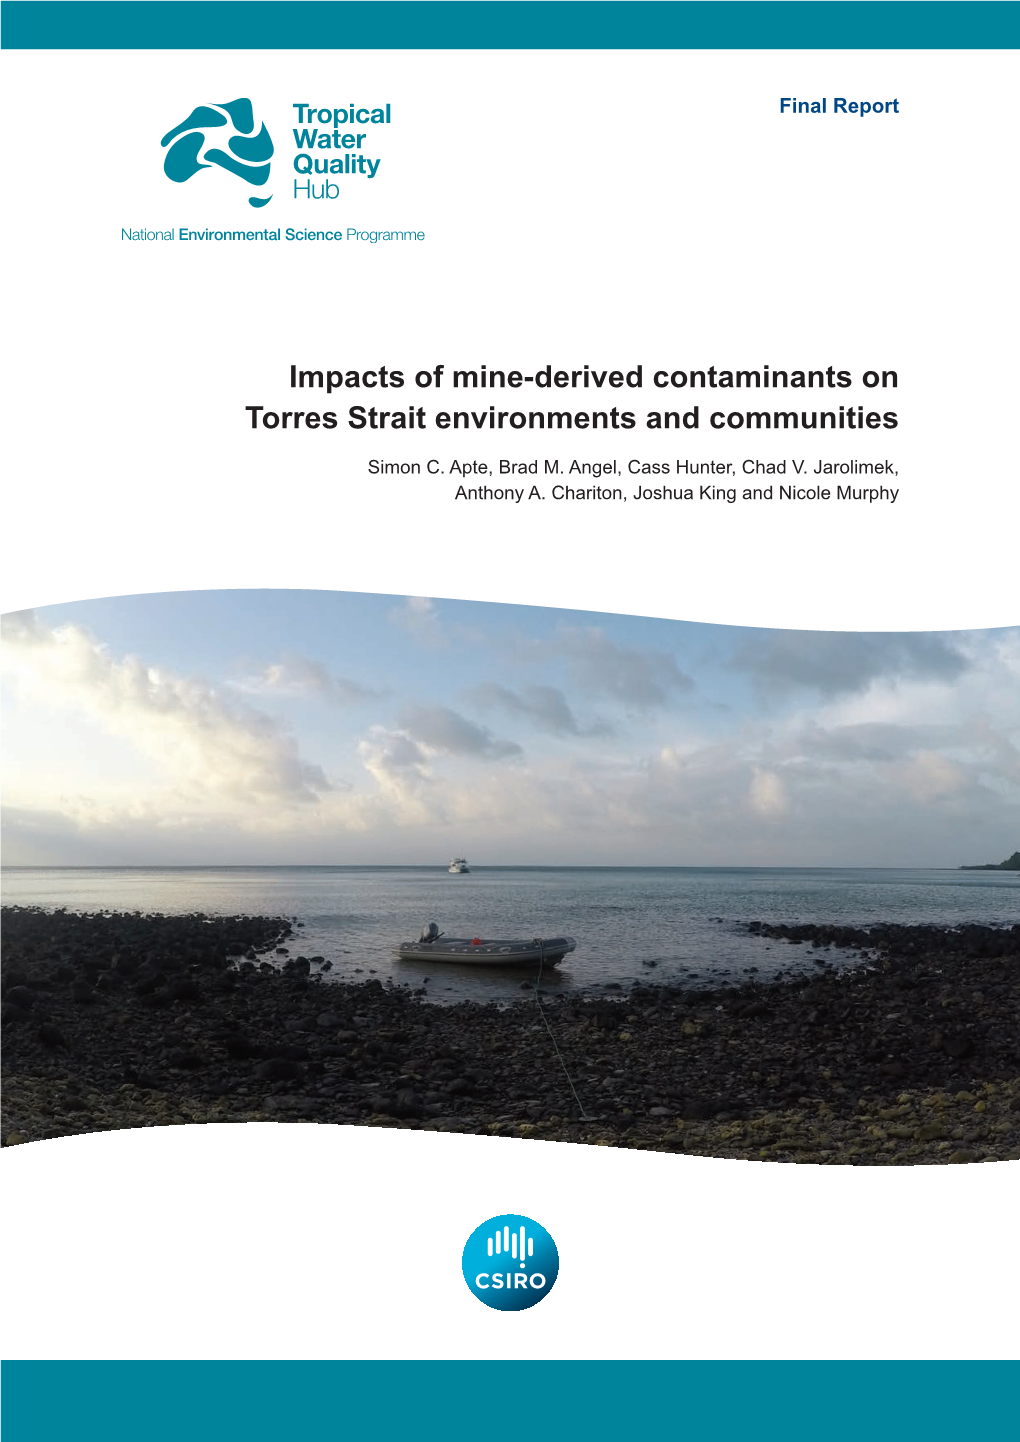 Impacts of Mine-Derived Contaminants on Torres Strait Environments and Communities